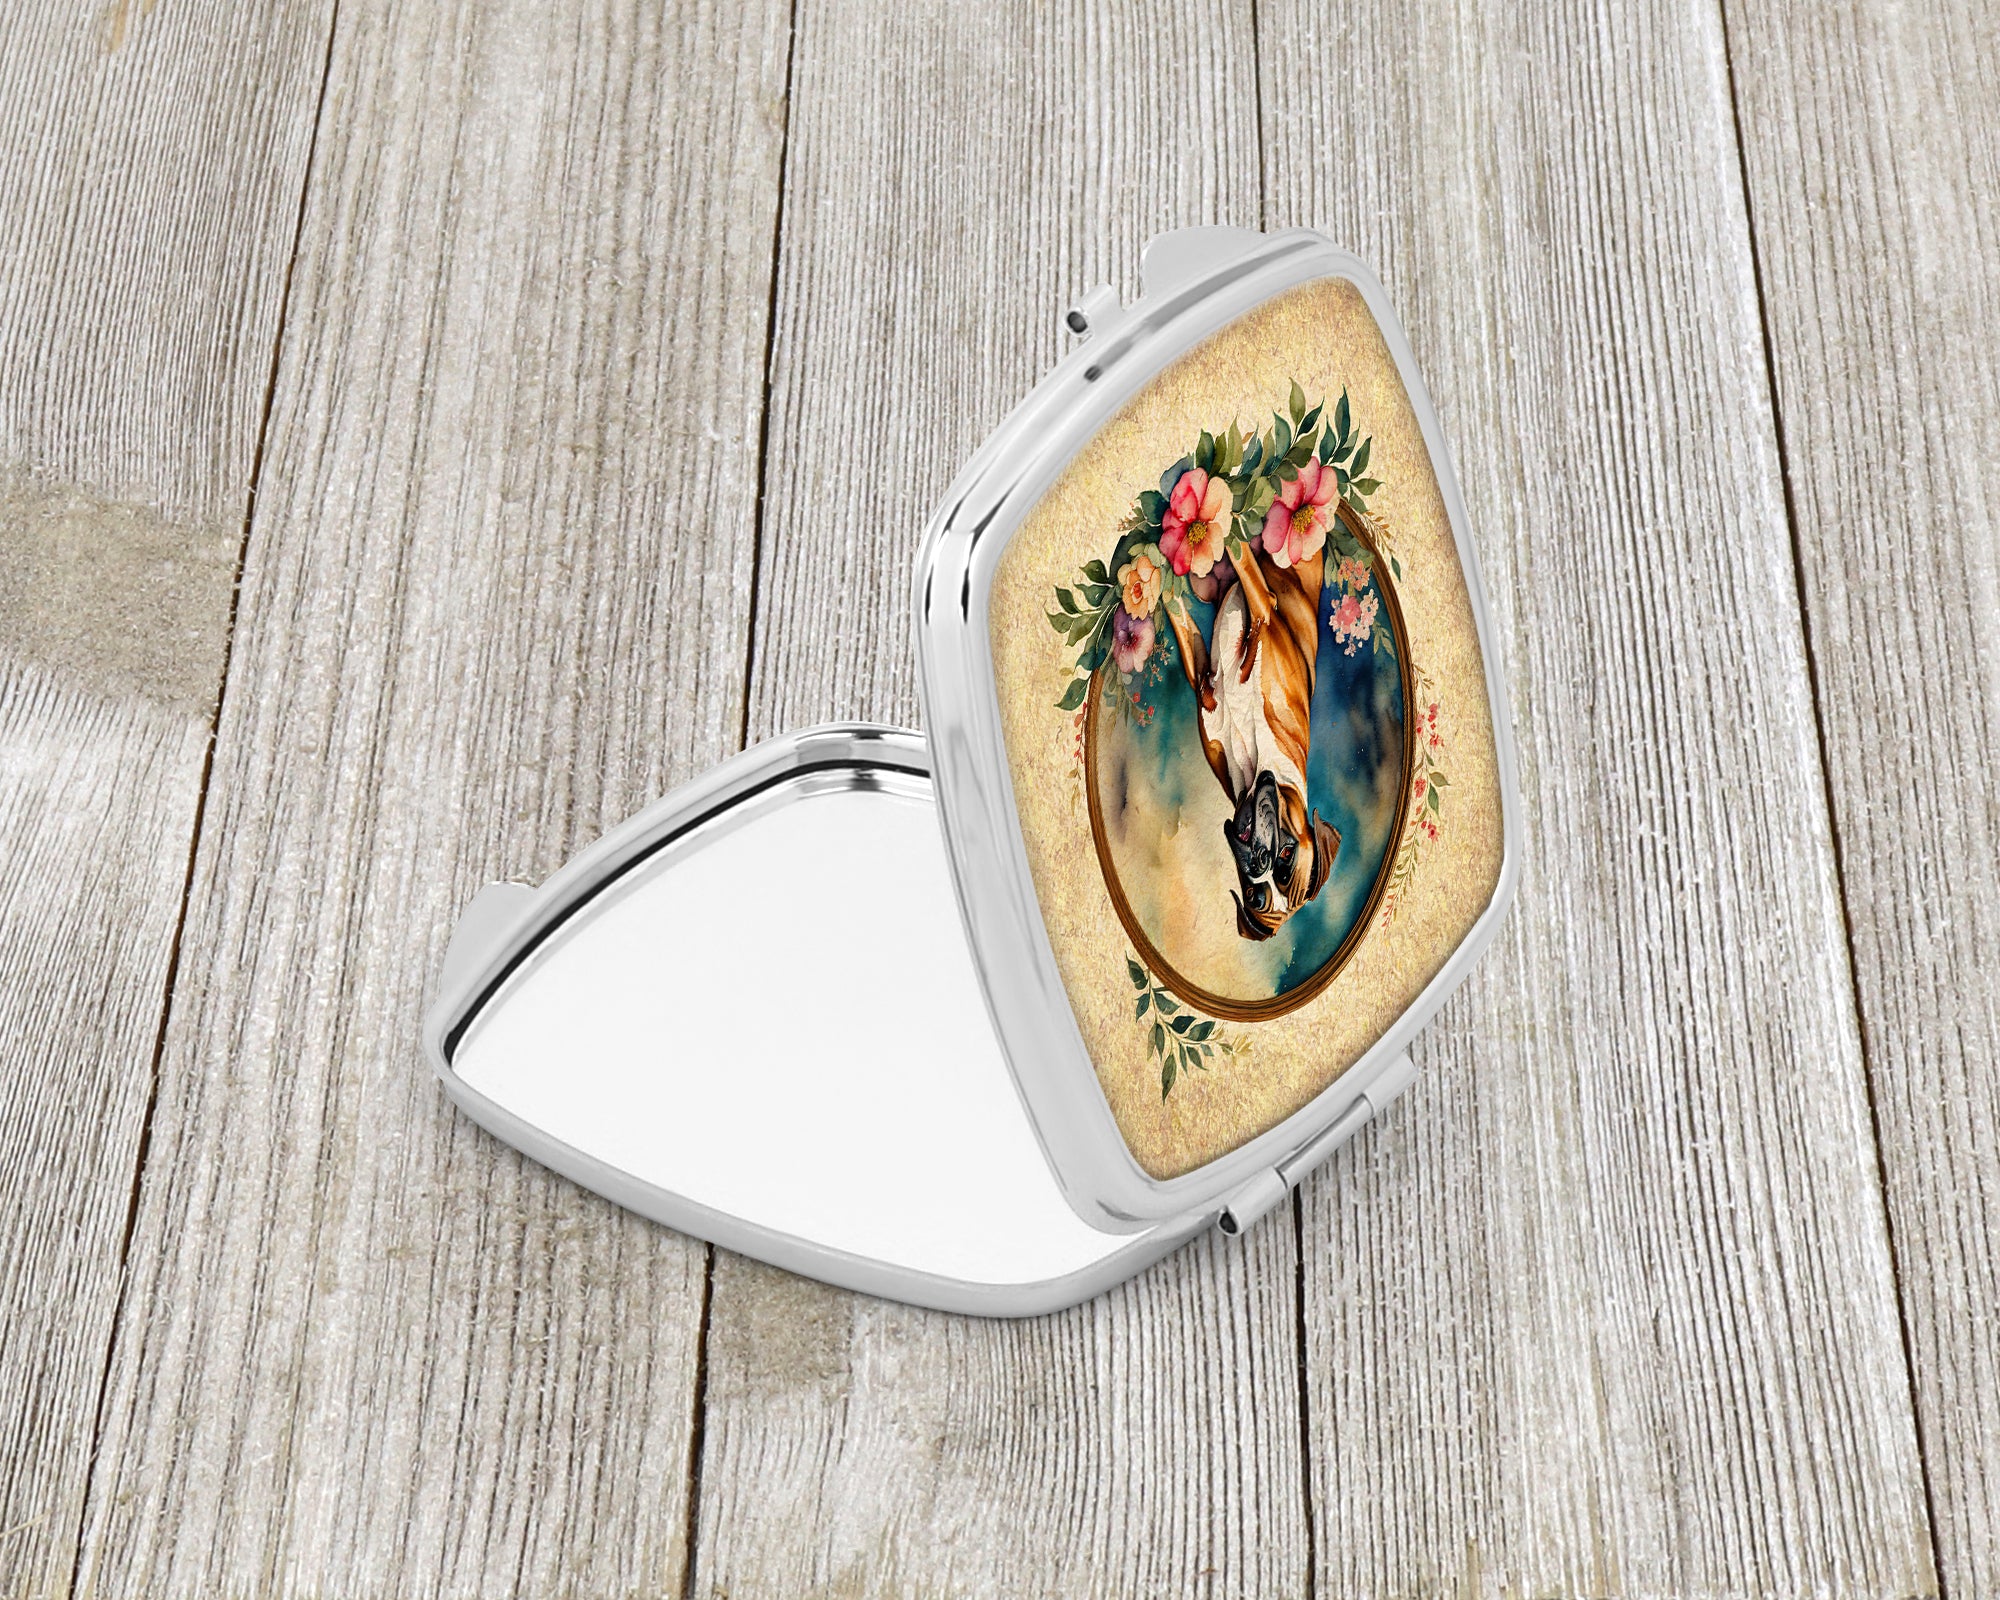 Buy this Boxer and Flowers Compact Mirror